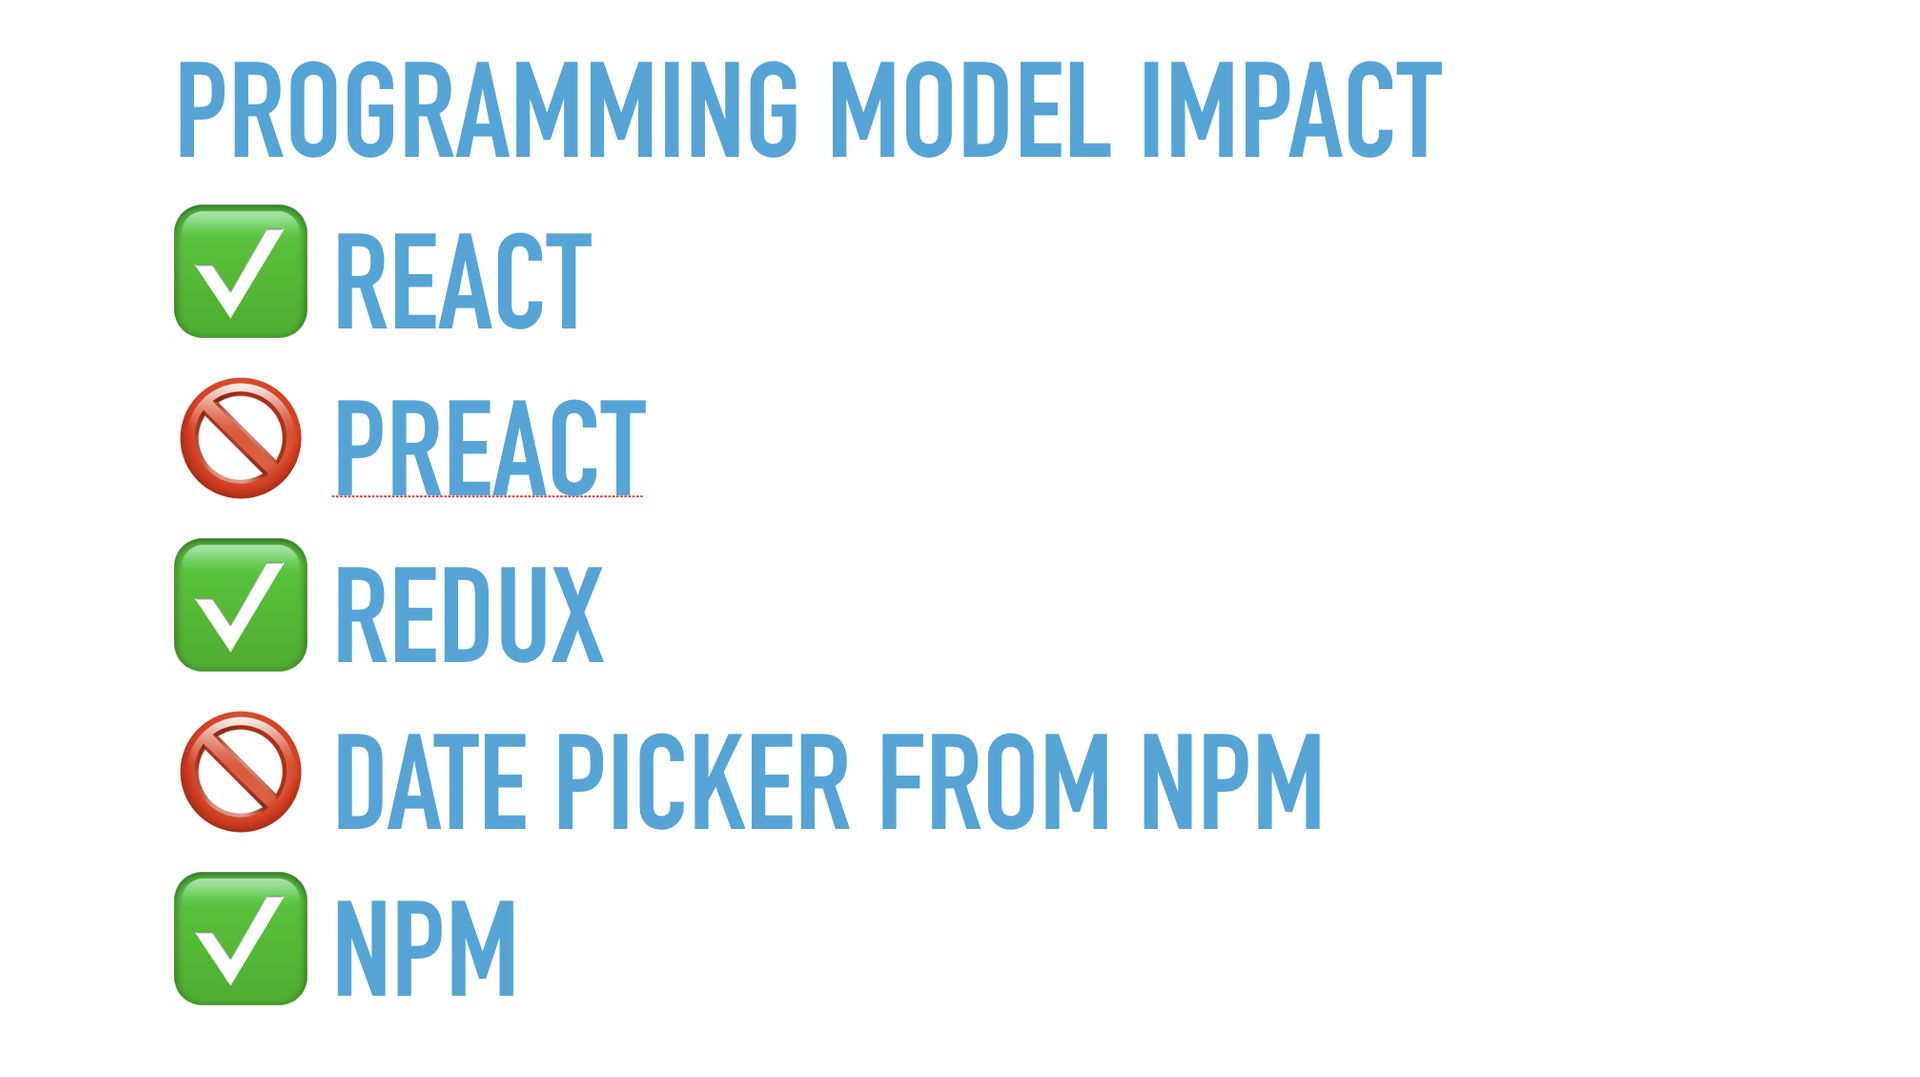 Slide text: Programming model impact examples: React, Preact, Redux, Date picker from npm, npm